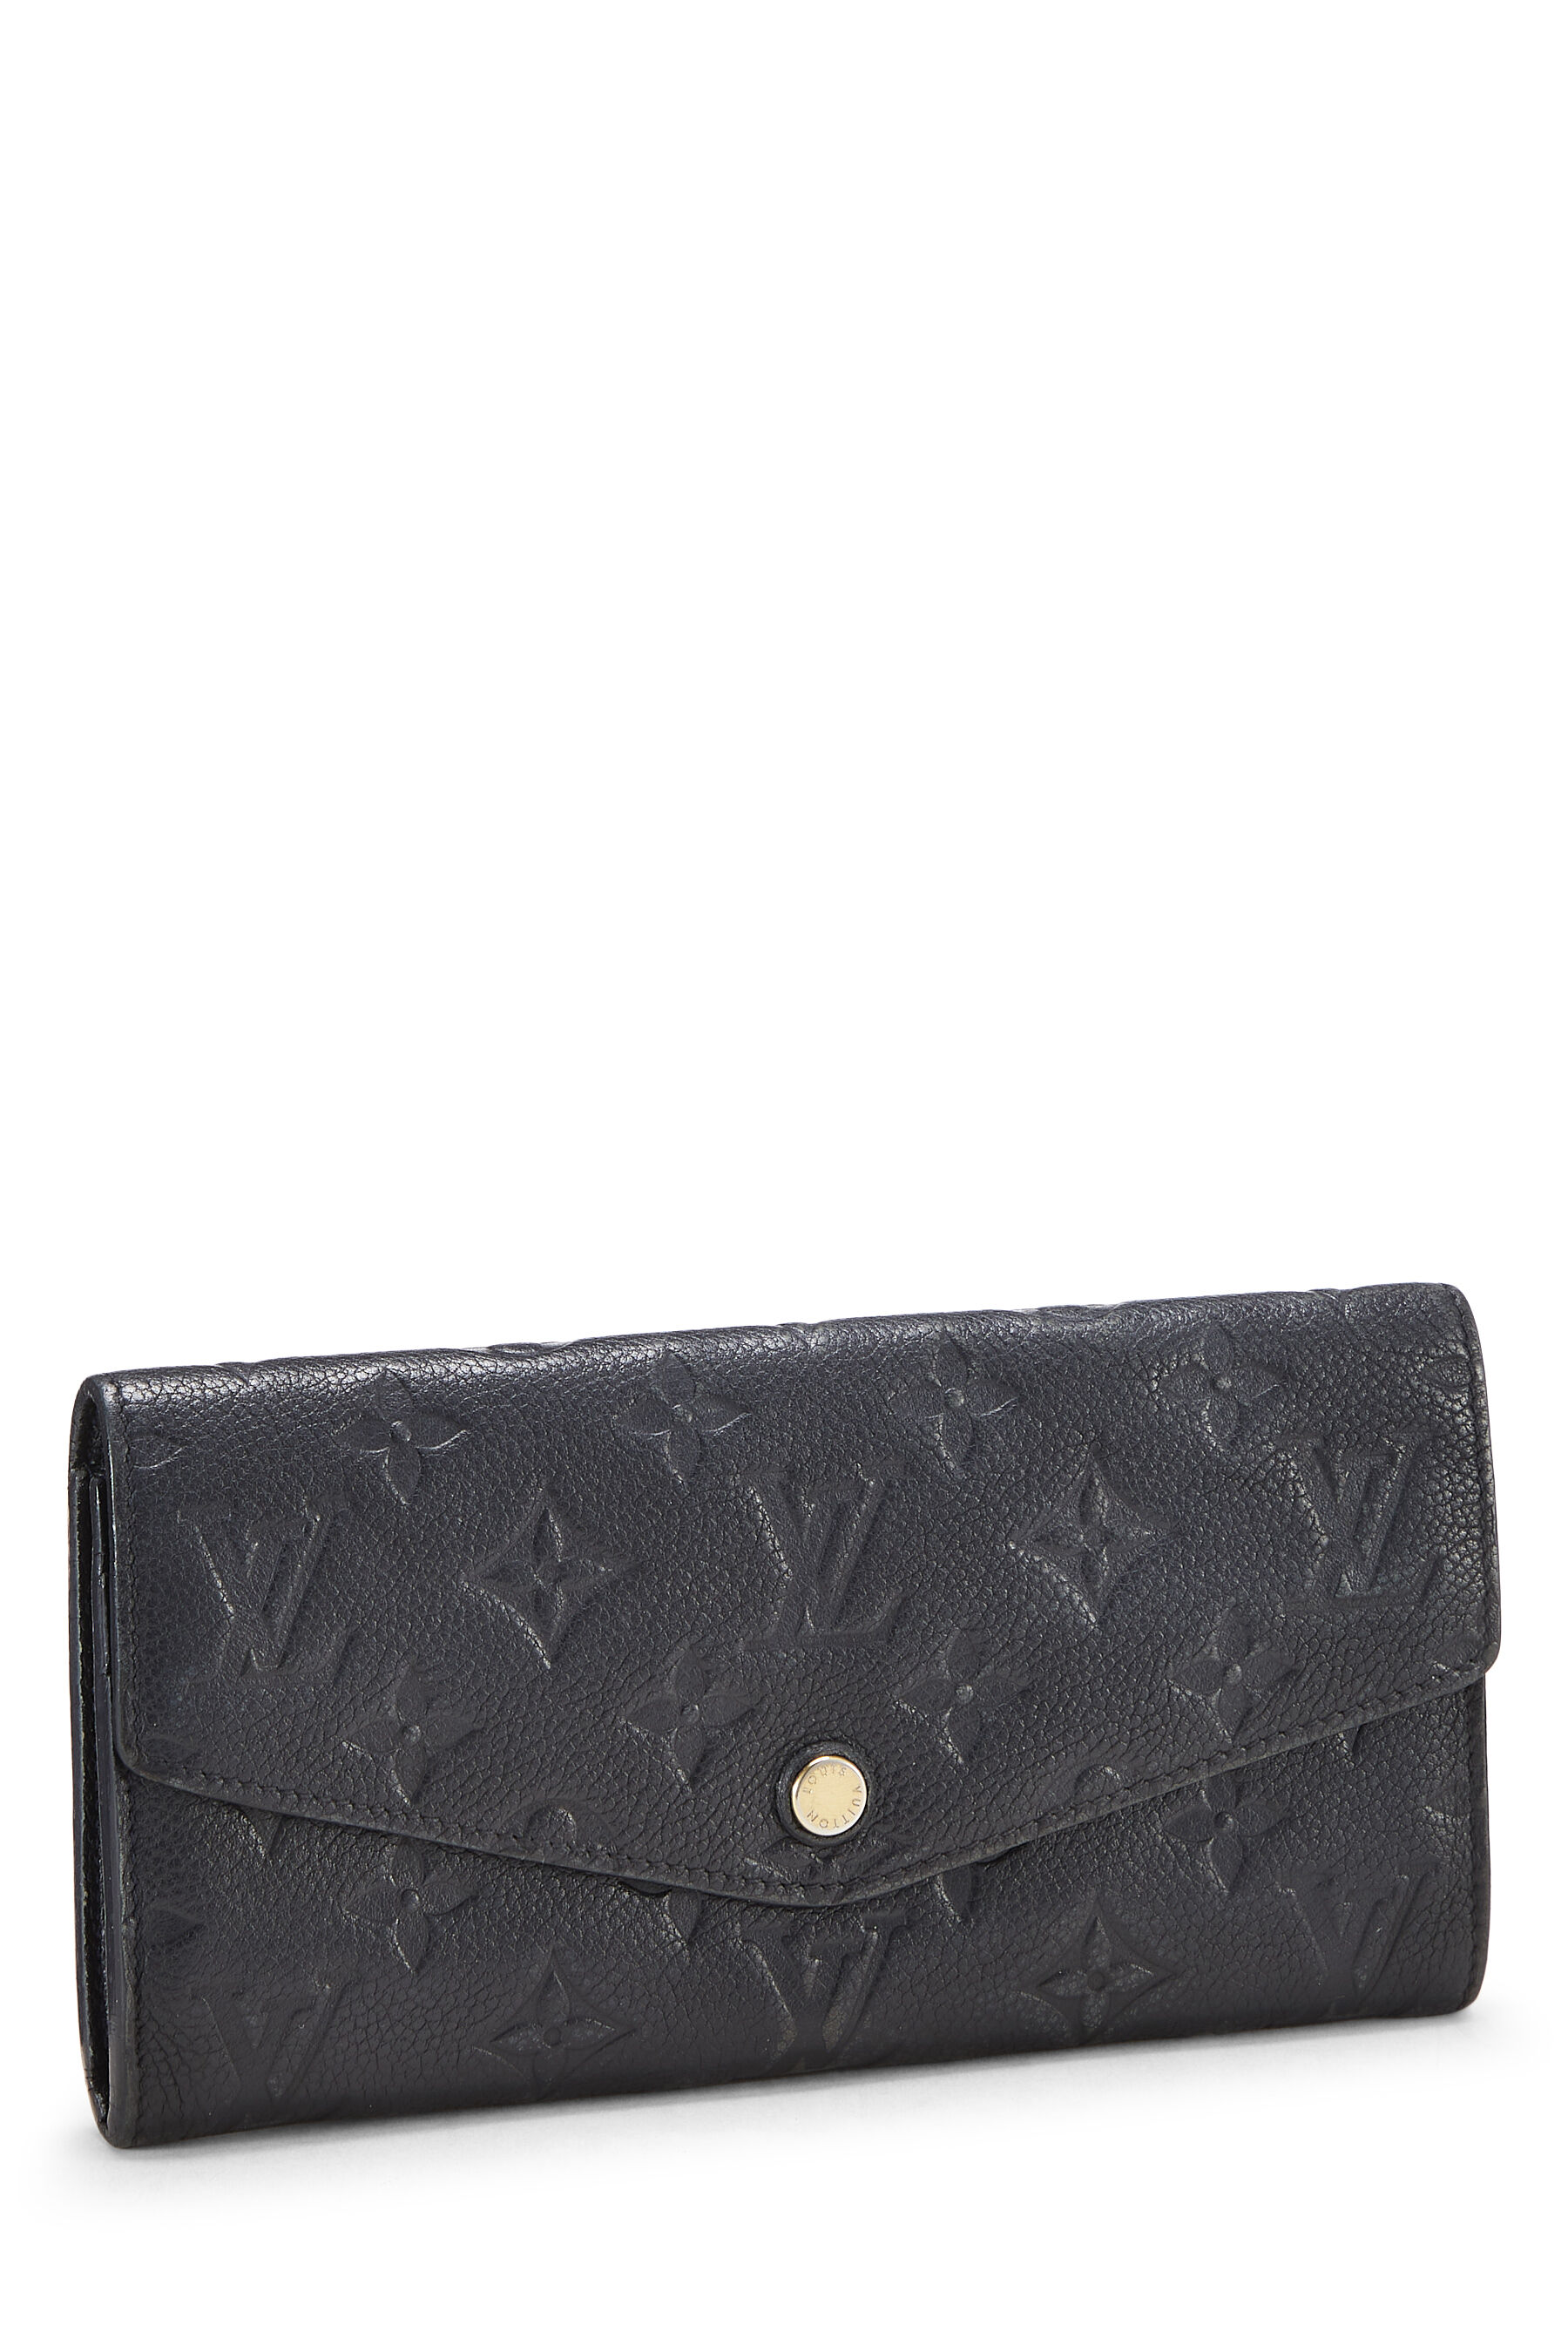 Louis Vuitton Black Empreinte Leather Compact Curieuse Wallet - A World Of  Goods For You, LLC